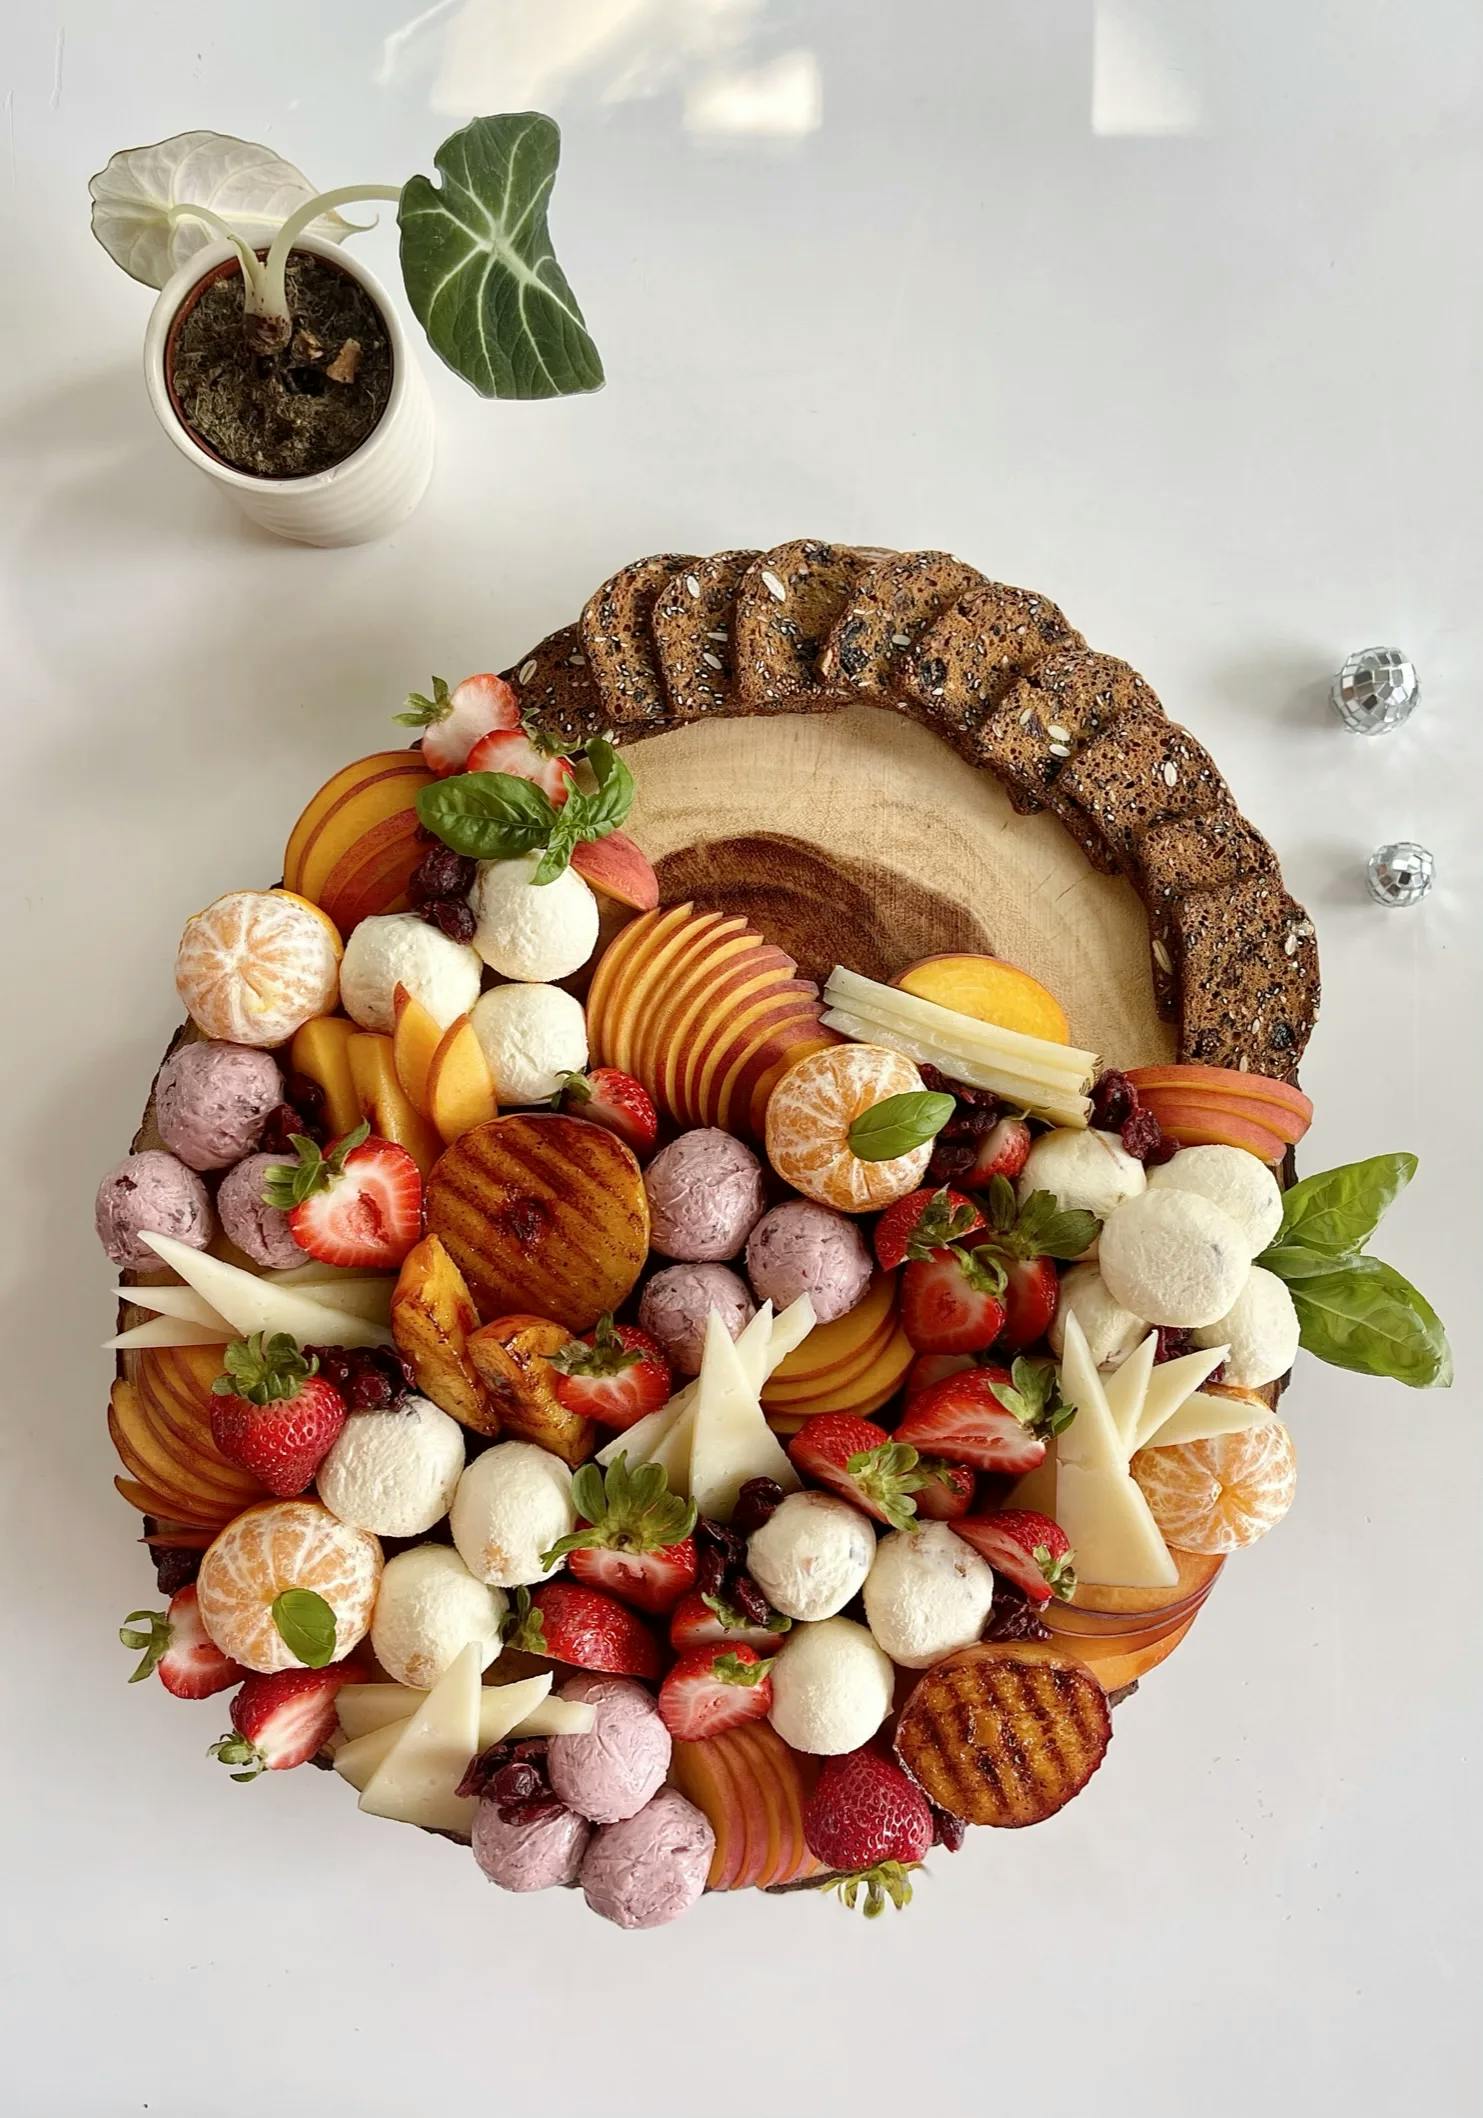 Picture for Grilled Peach Cheese & Fruit Basket